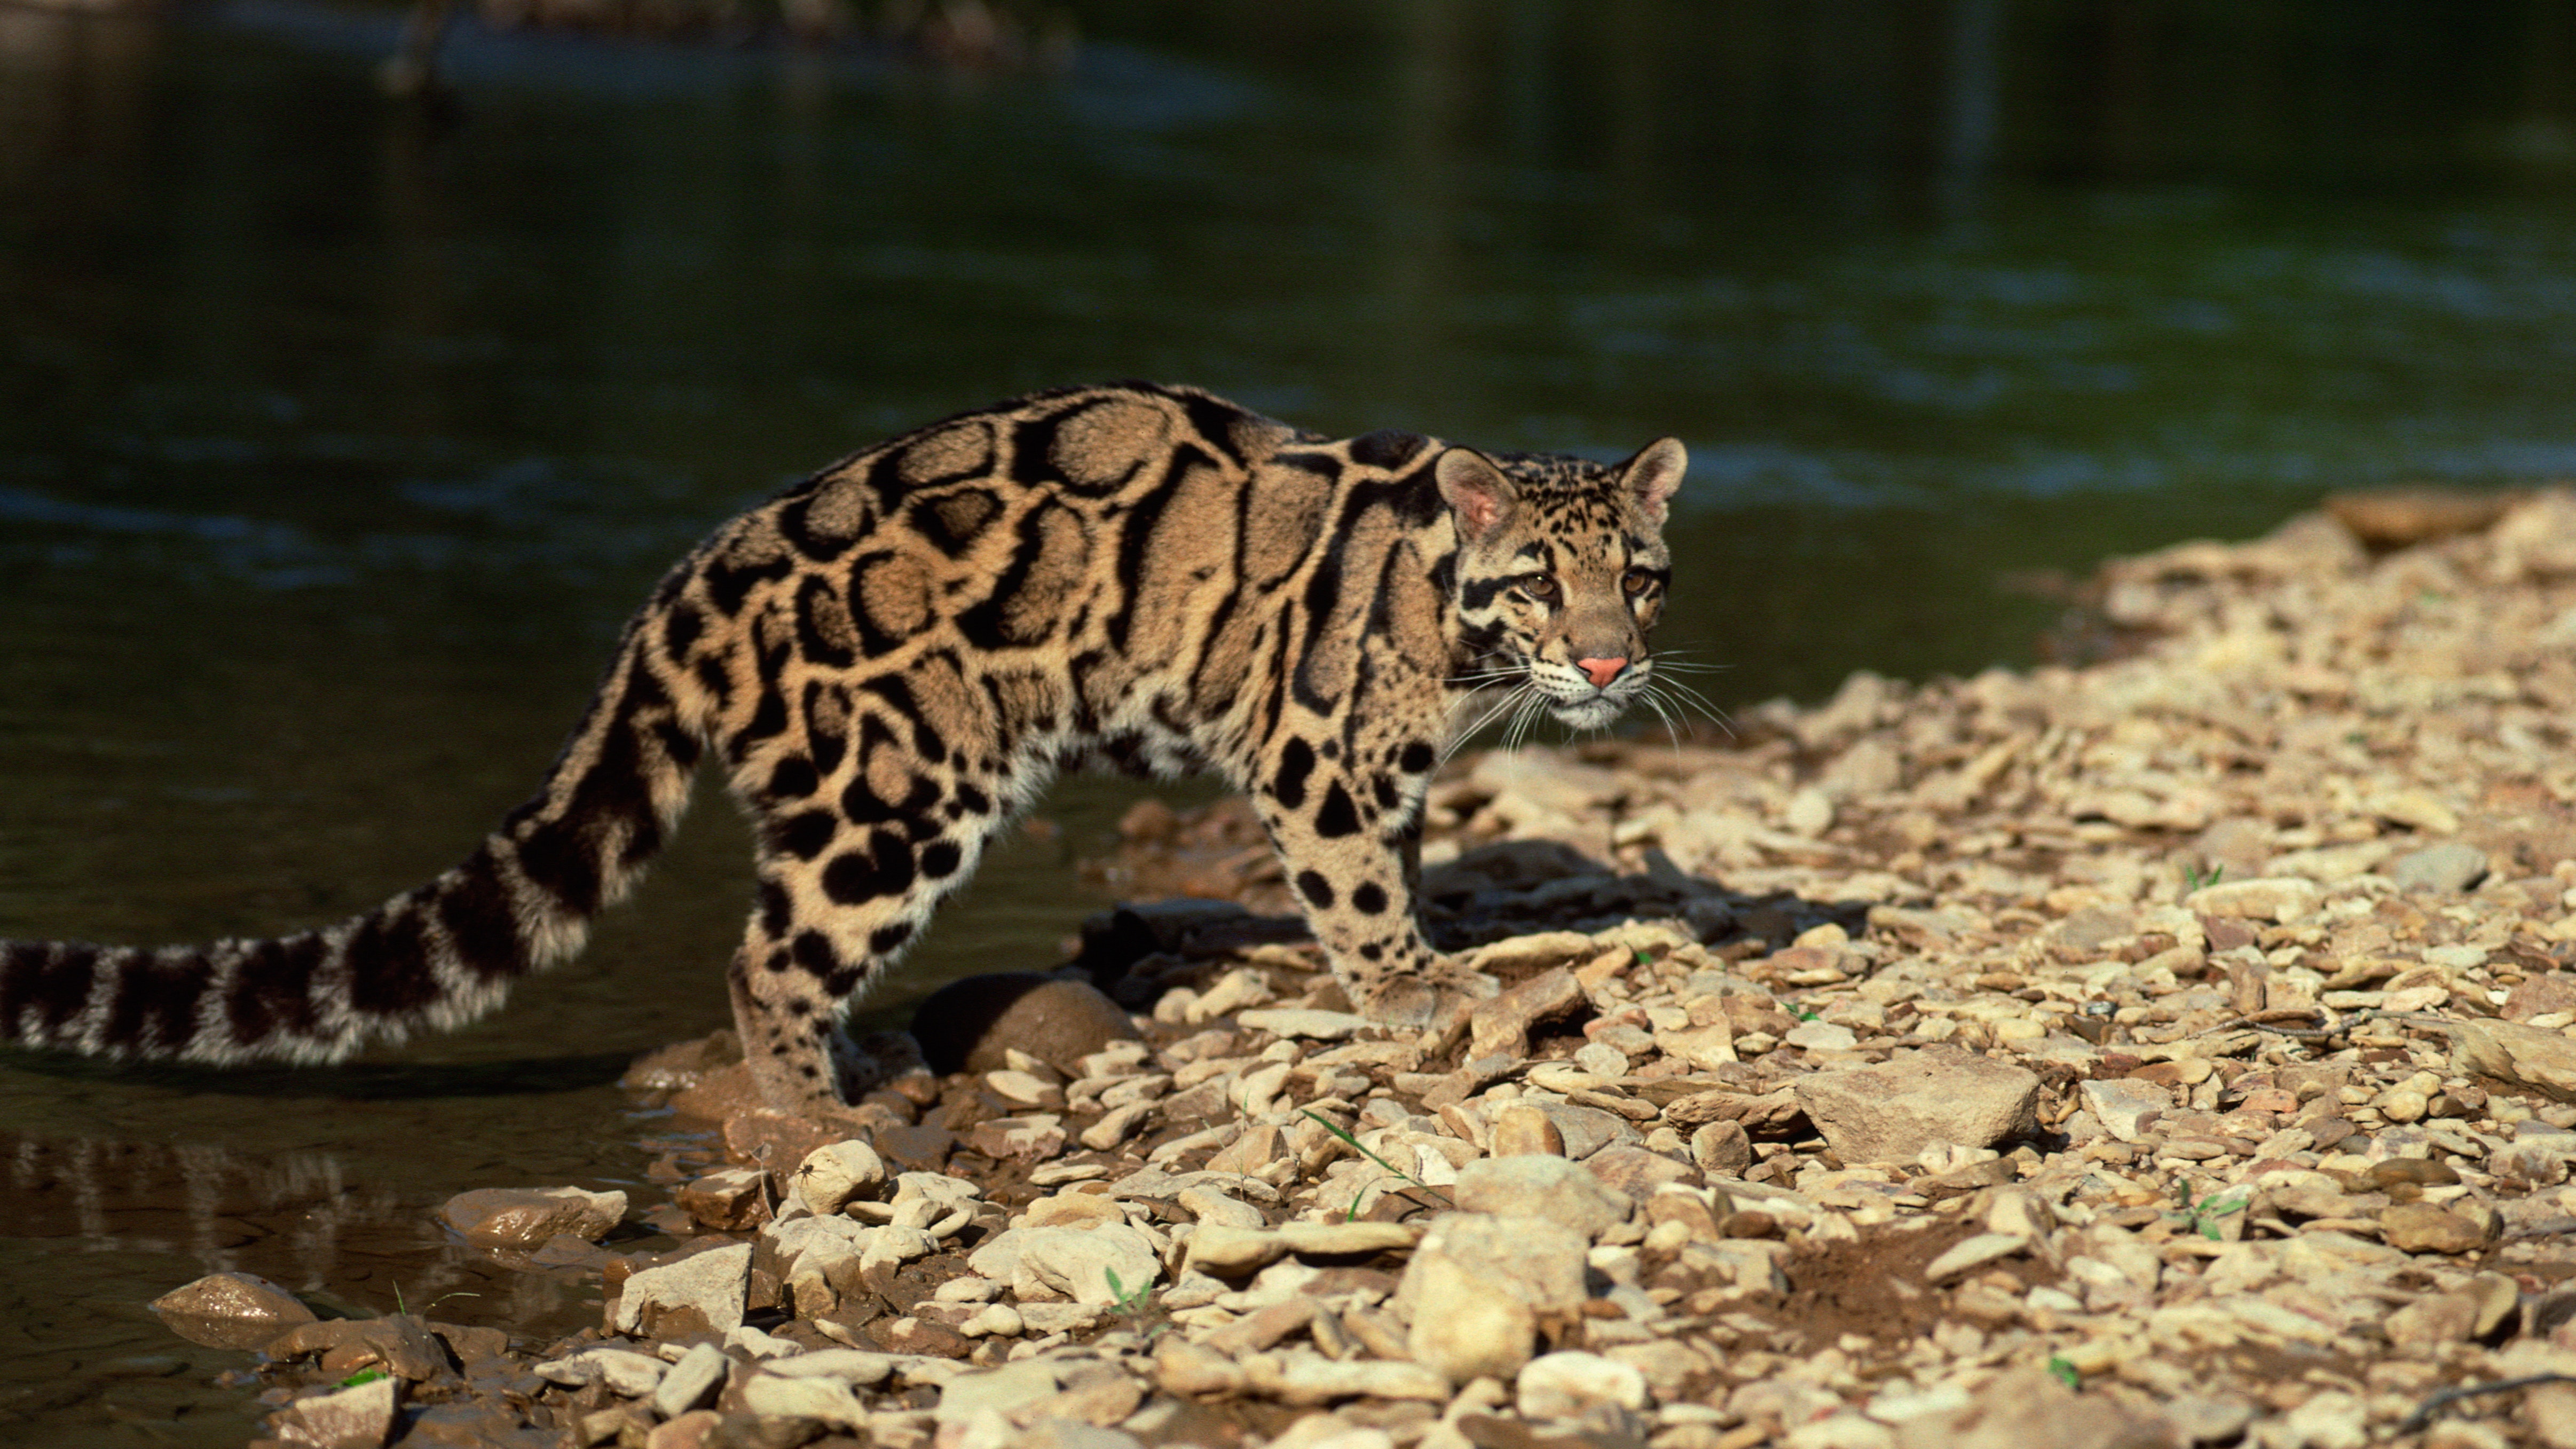 clouded leopard toy